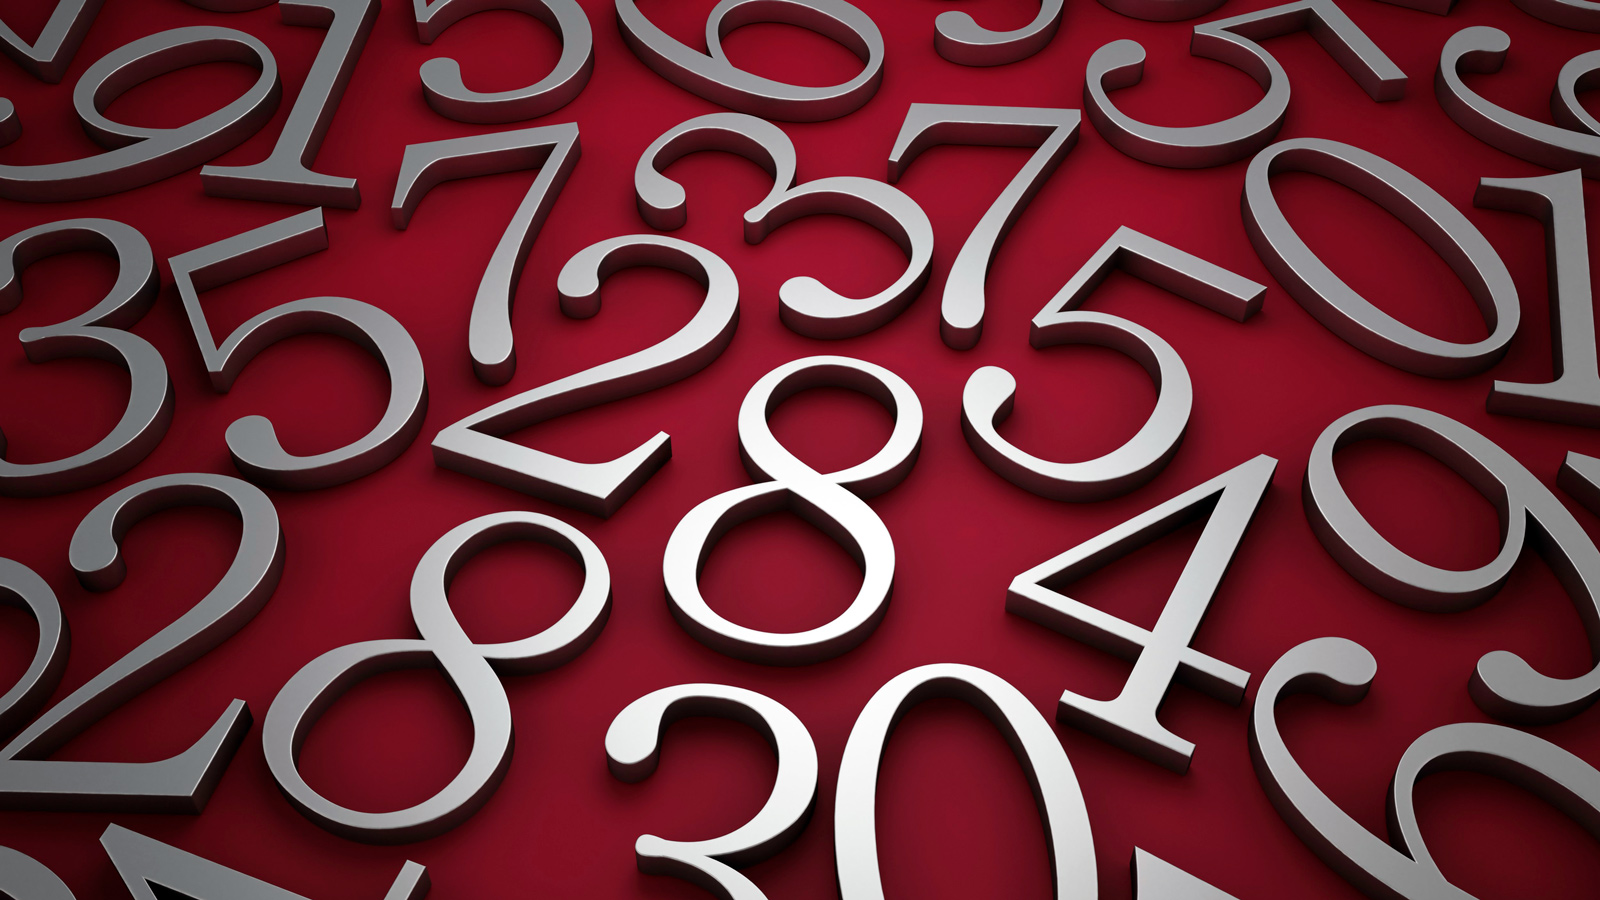 Silver metallic numbers laid on red surface